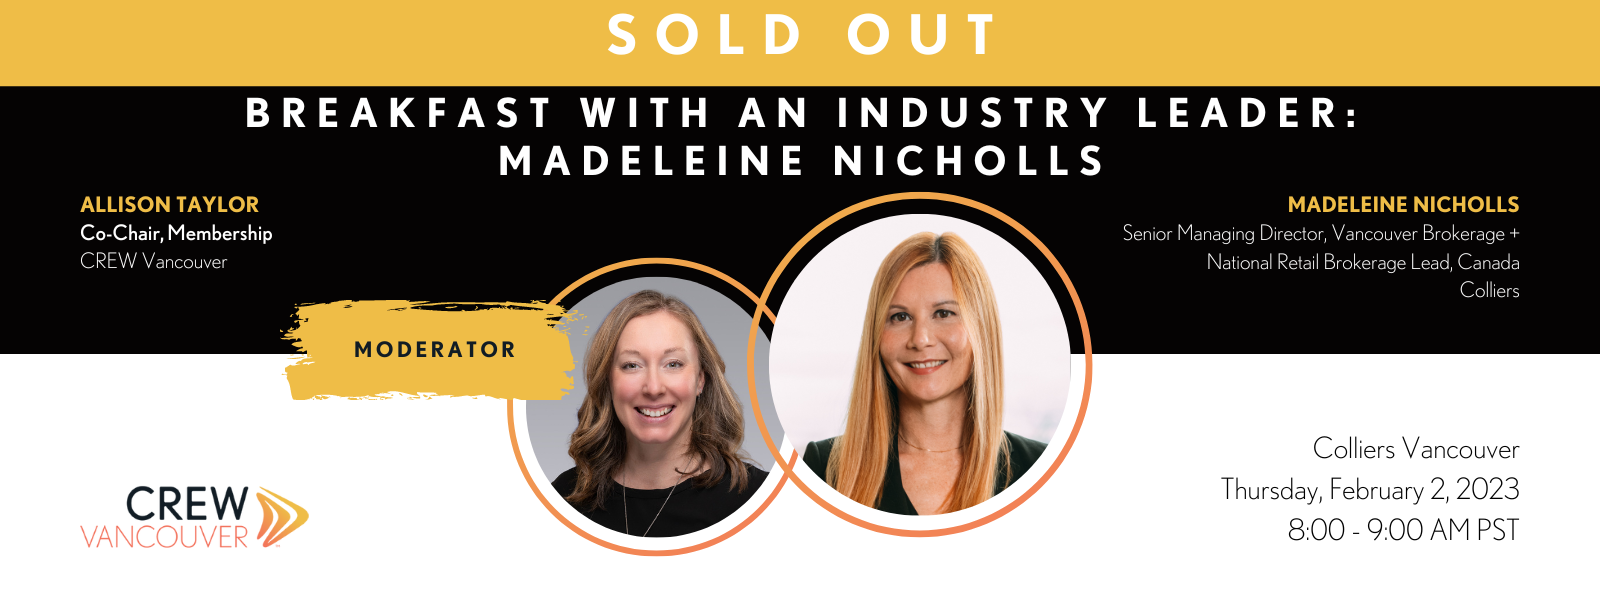 CREW Vancouver Event Breakfast with an Industry Leader Madeleine Nicholls 2023 02 02 WEB SOLD OUT V2